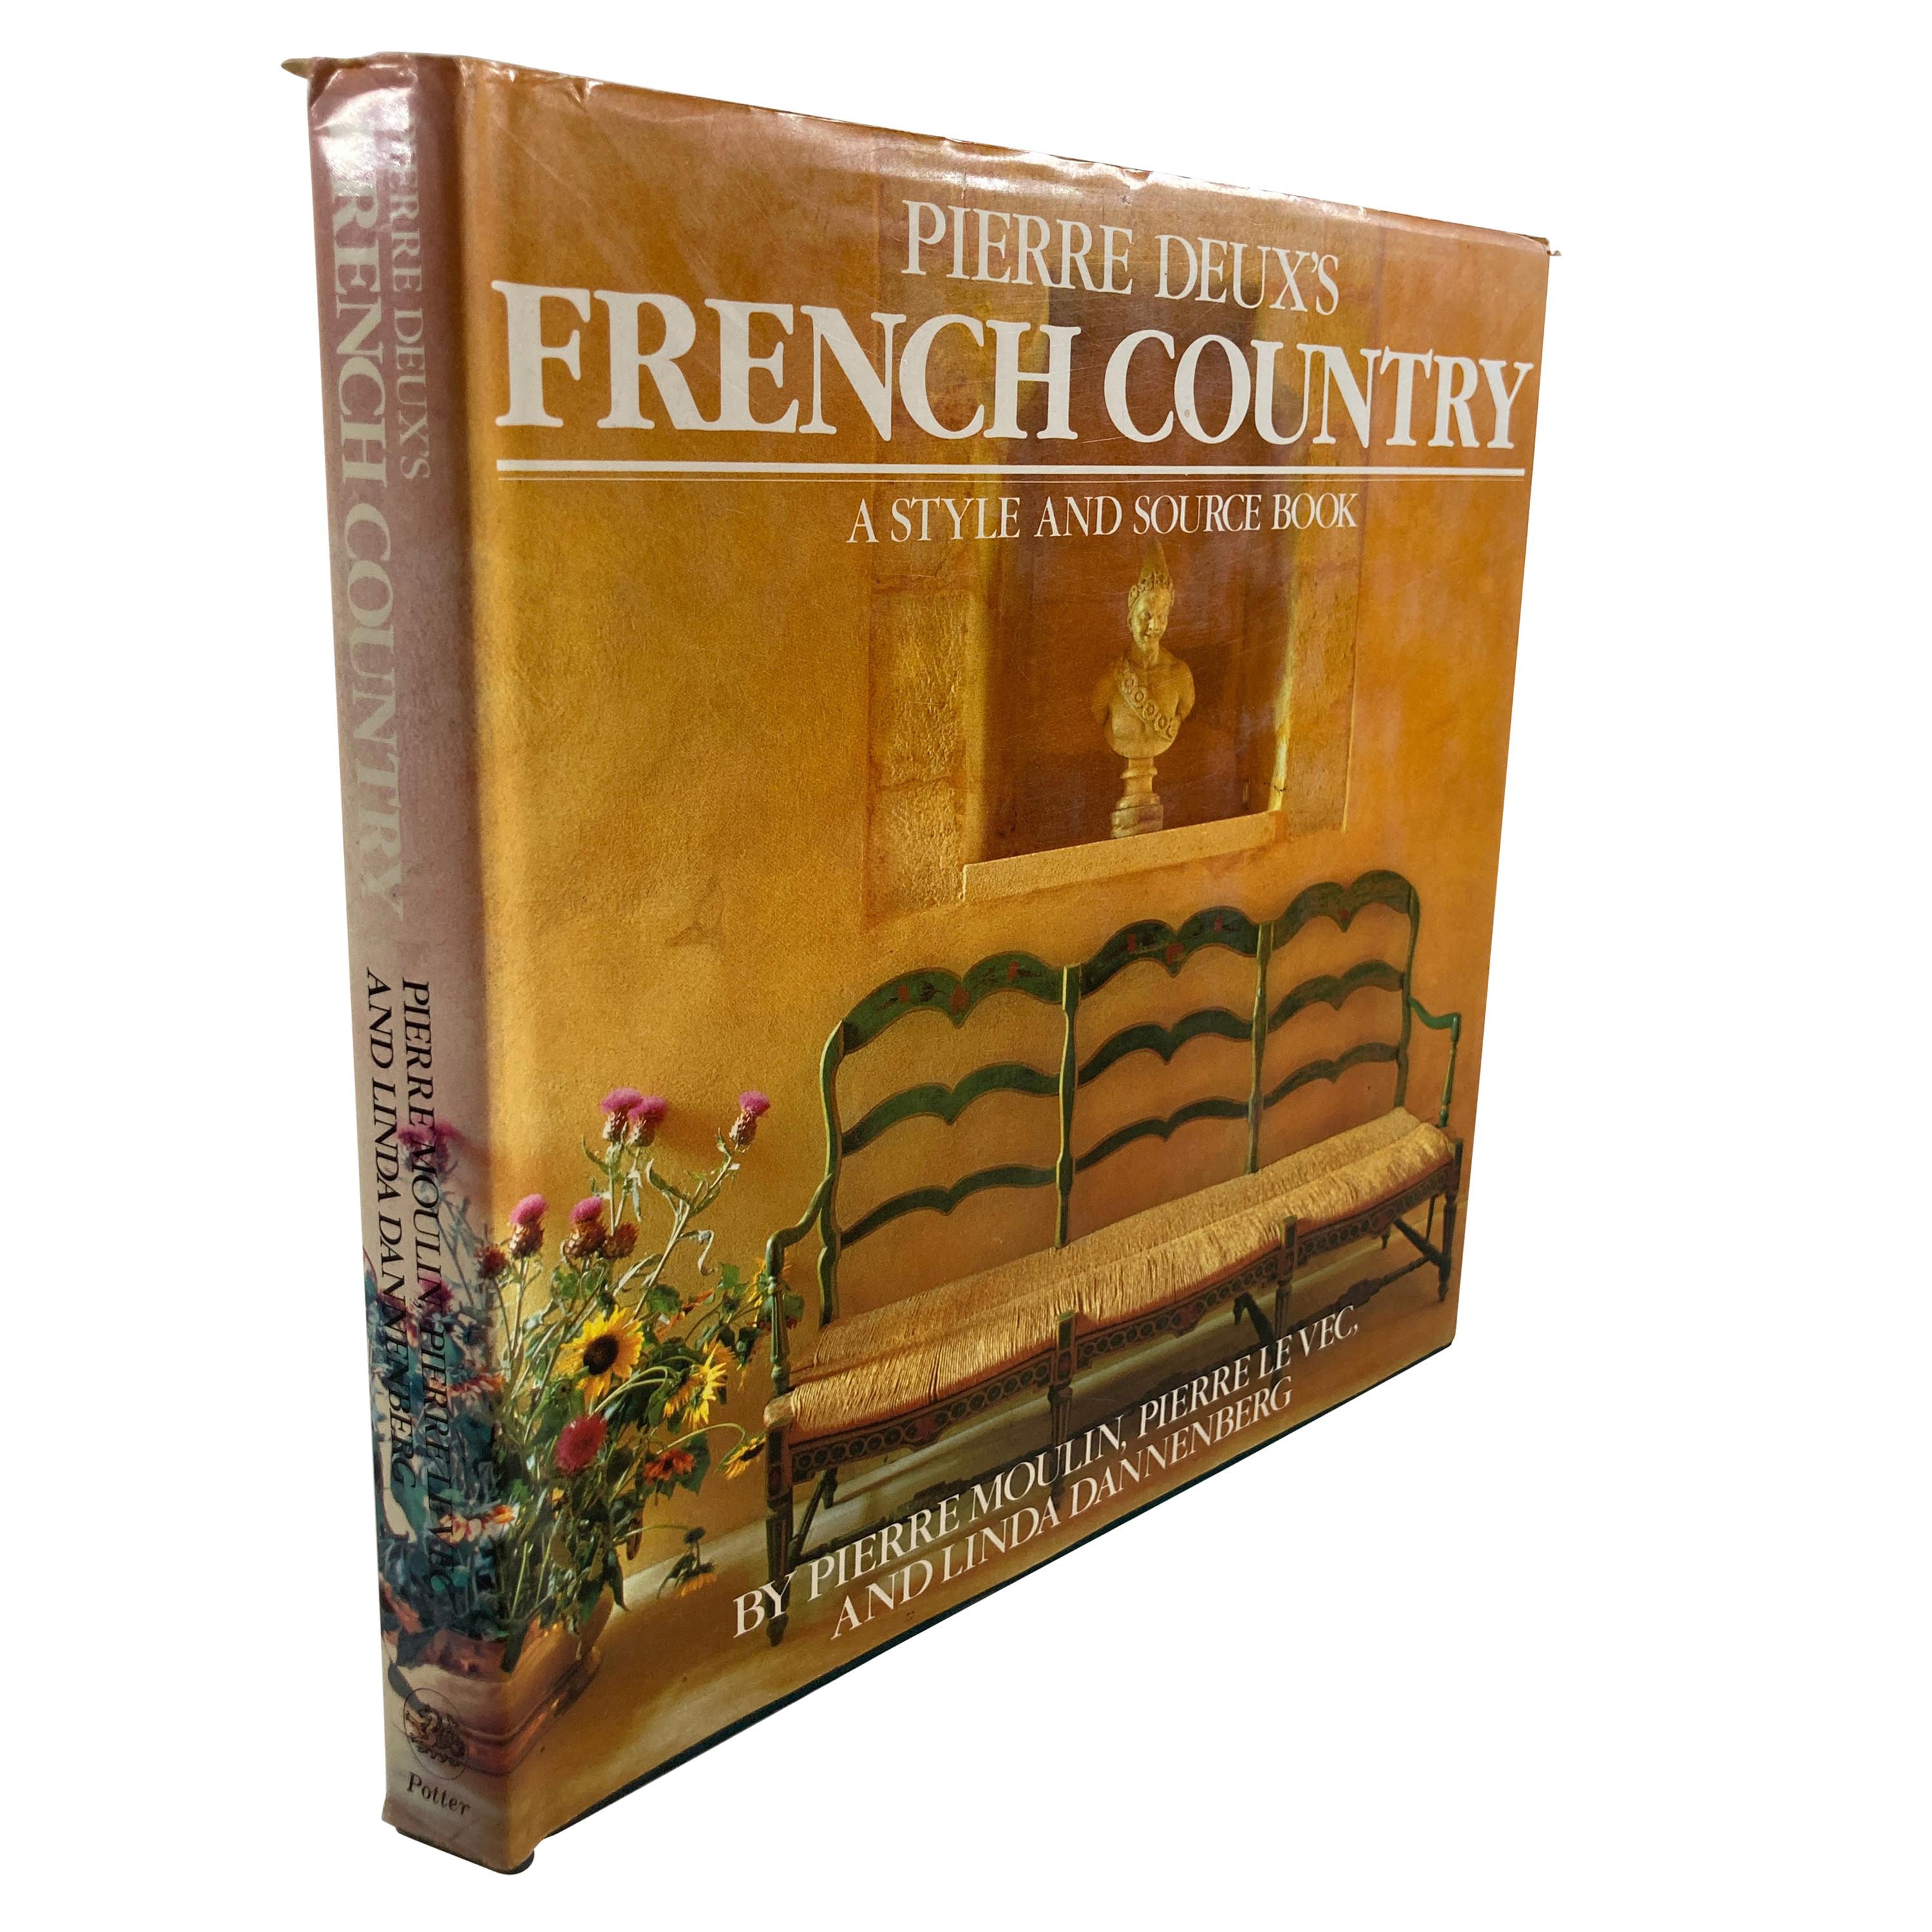 Pierre Deux's French Country Coffee Table Book